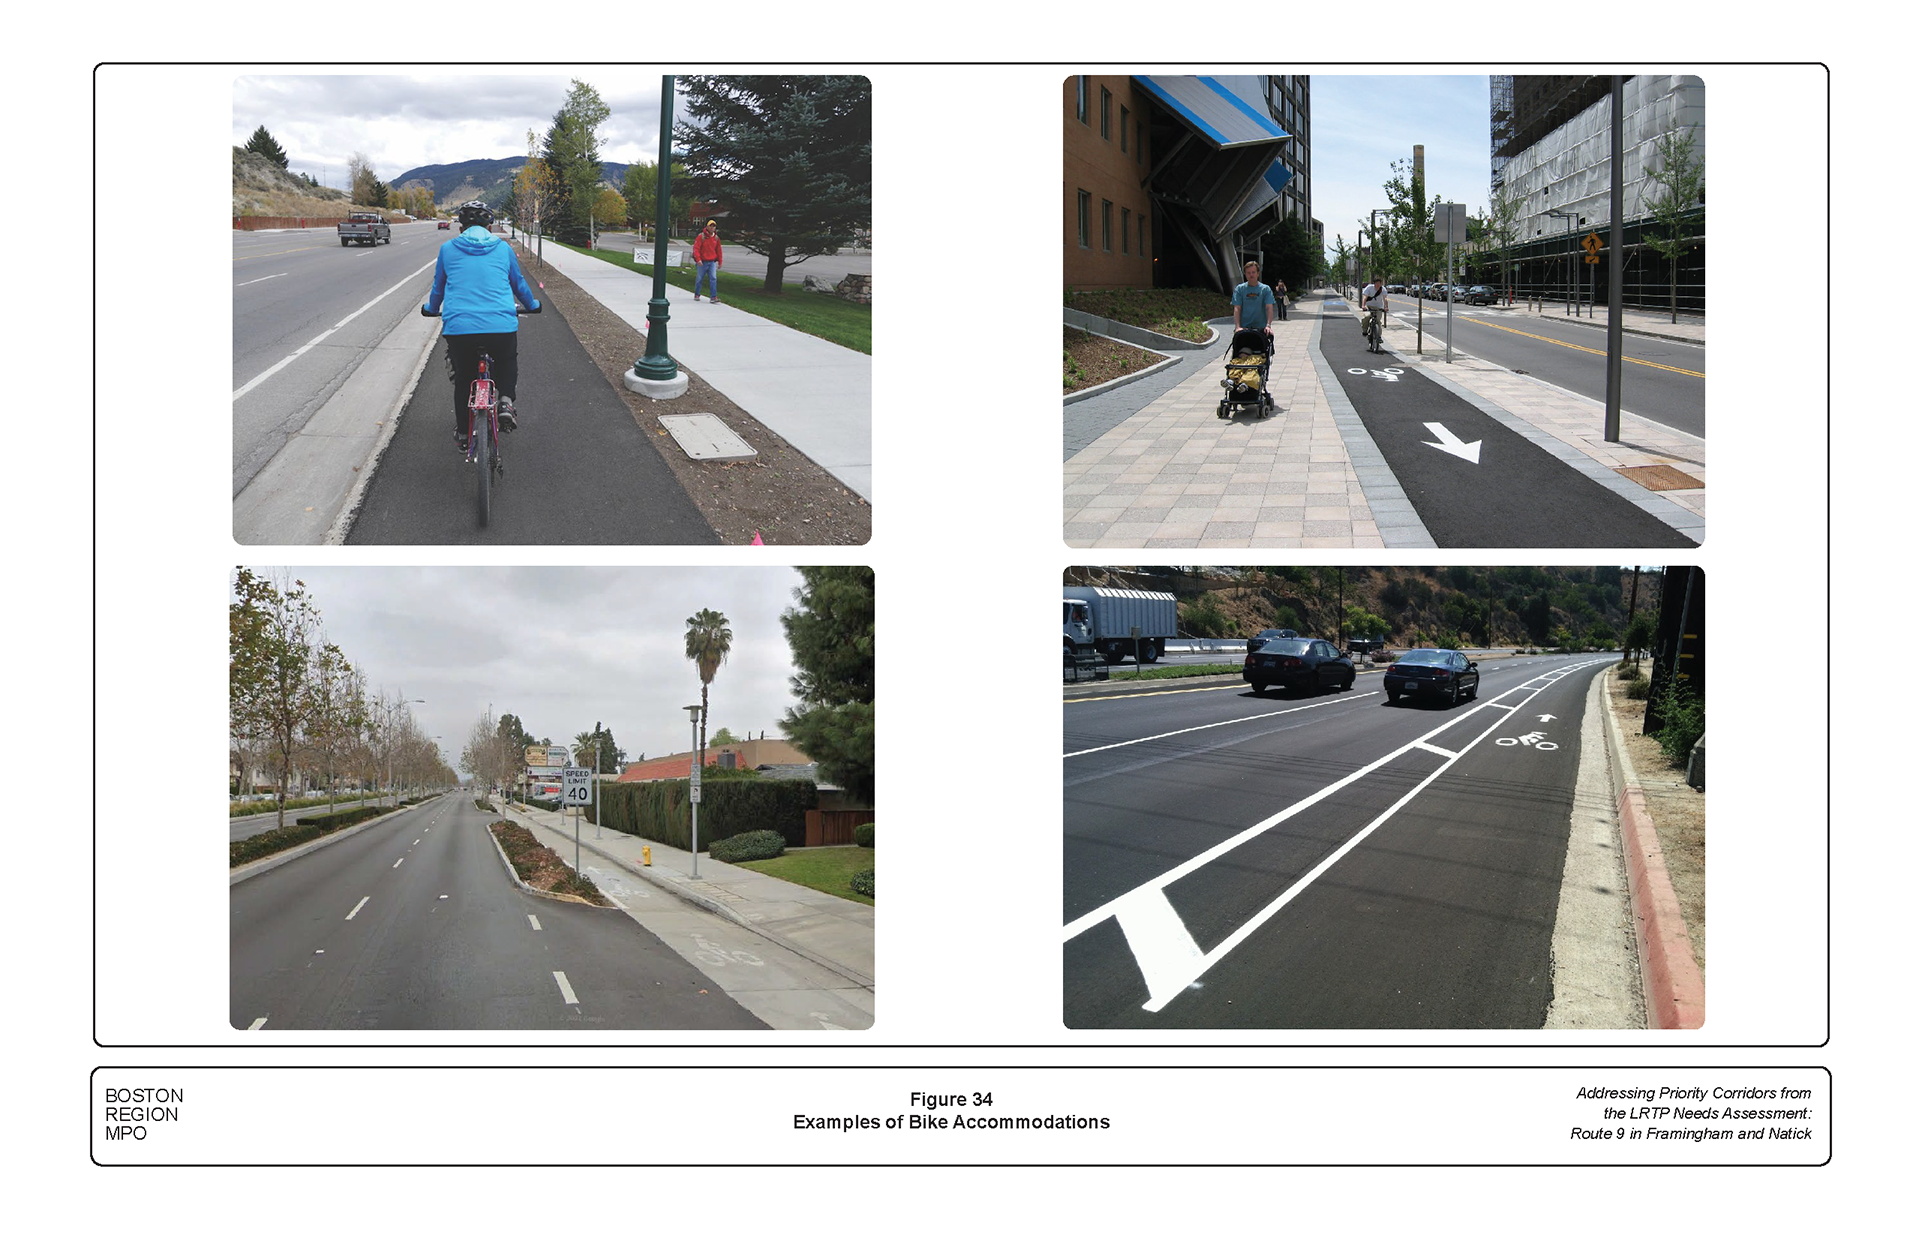 Figure 34 includes example photos of existing separated bike lanes